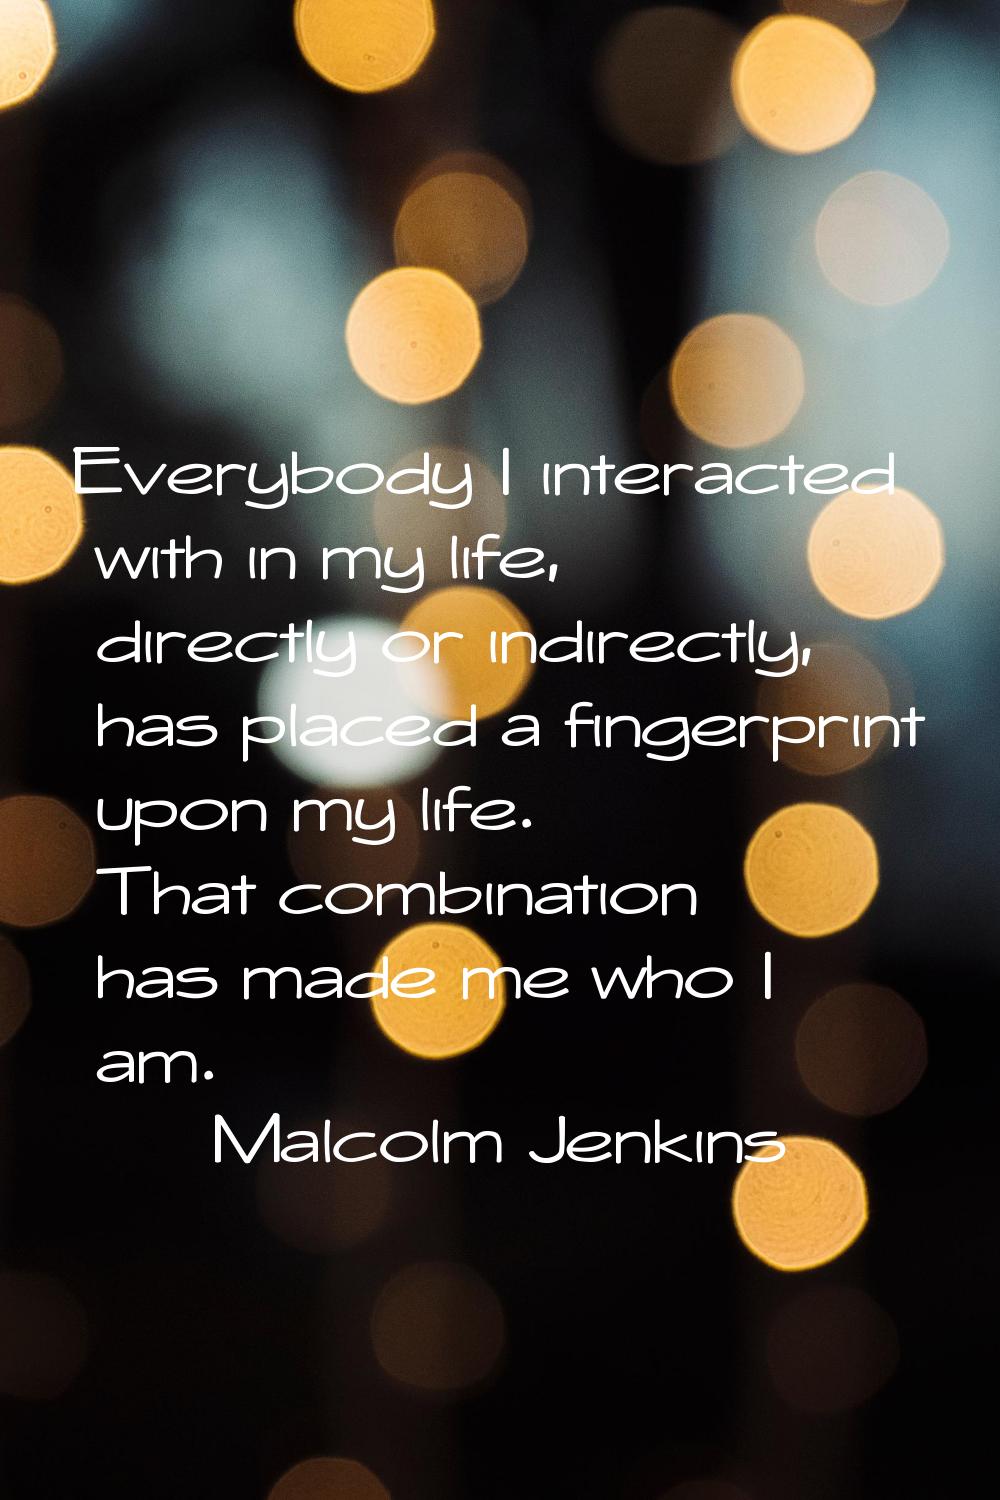 Everybody I interacted with in my life, directly or indirectly, has placed a fingerprint upon my li